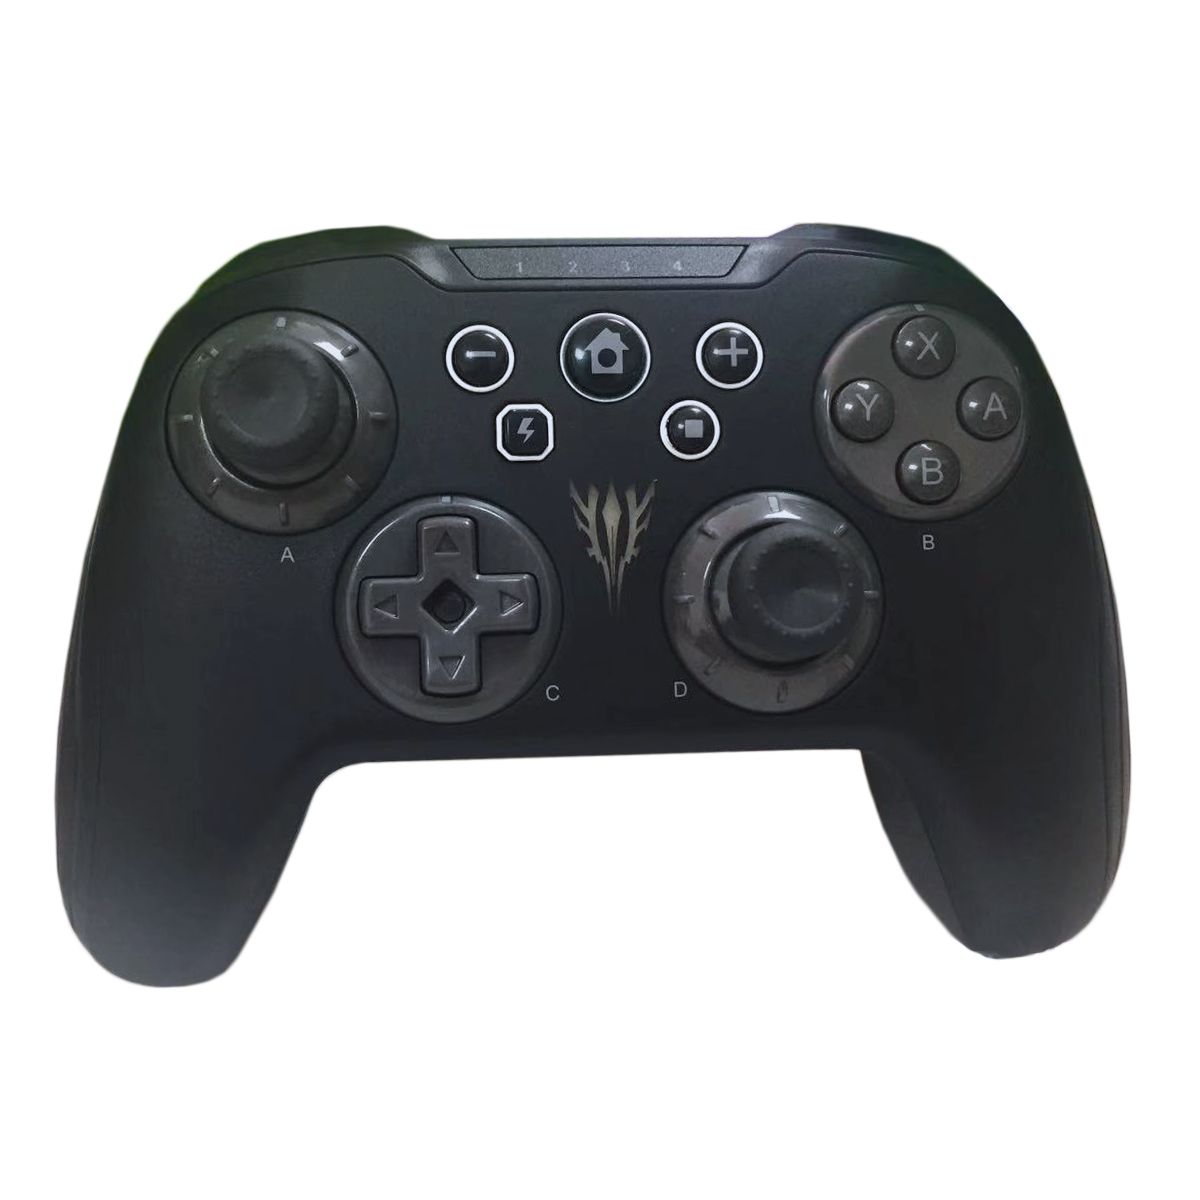 Wireless-Gamepad-Vibration-Game-Controller-for-Nintendo-Switch-for-Playstation-PC-Android-Mobile-Pho-1646891